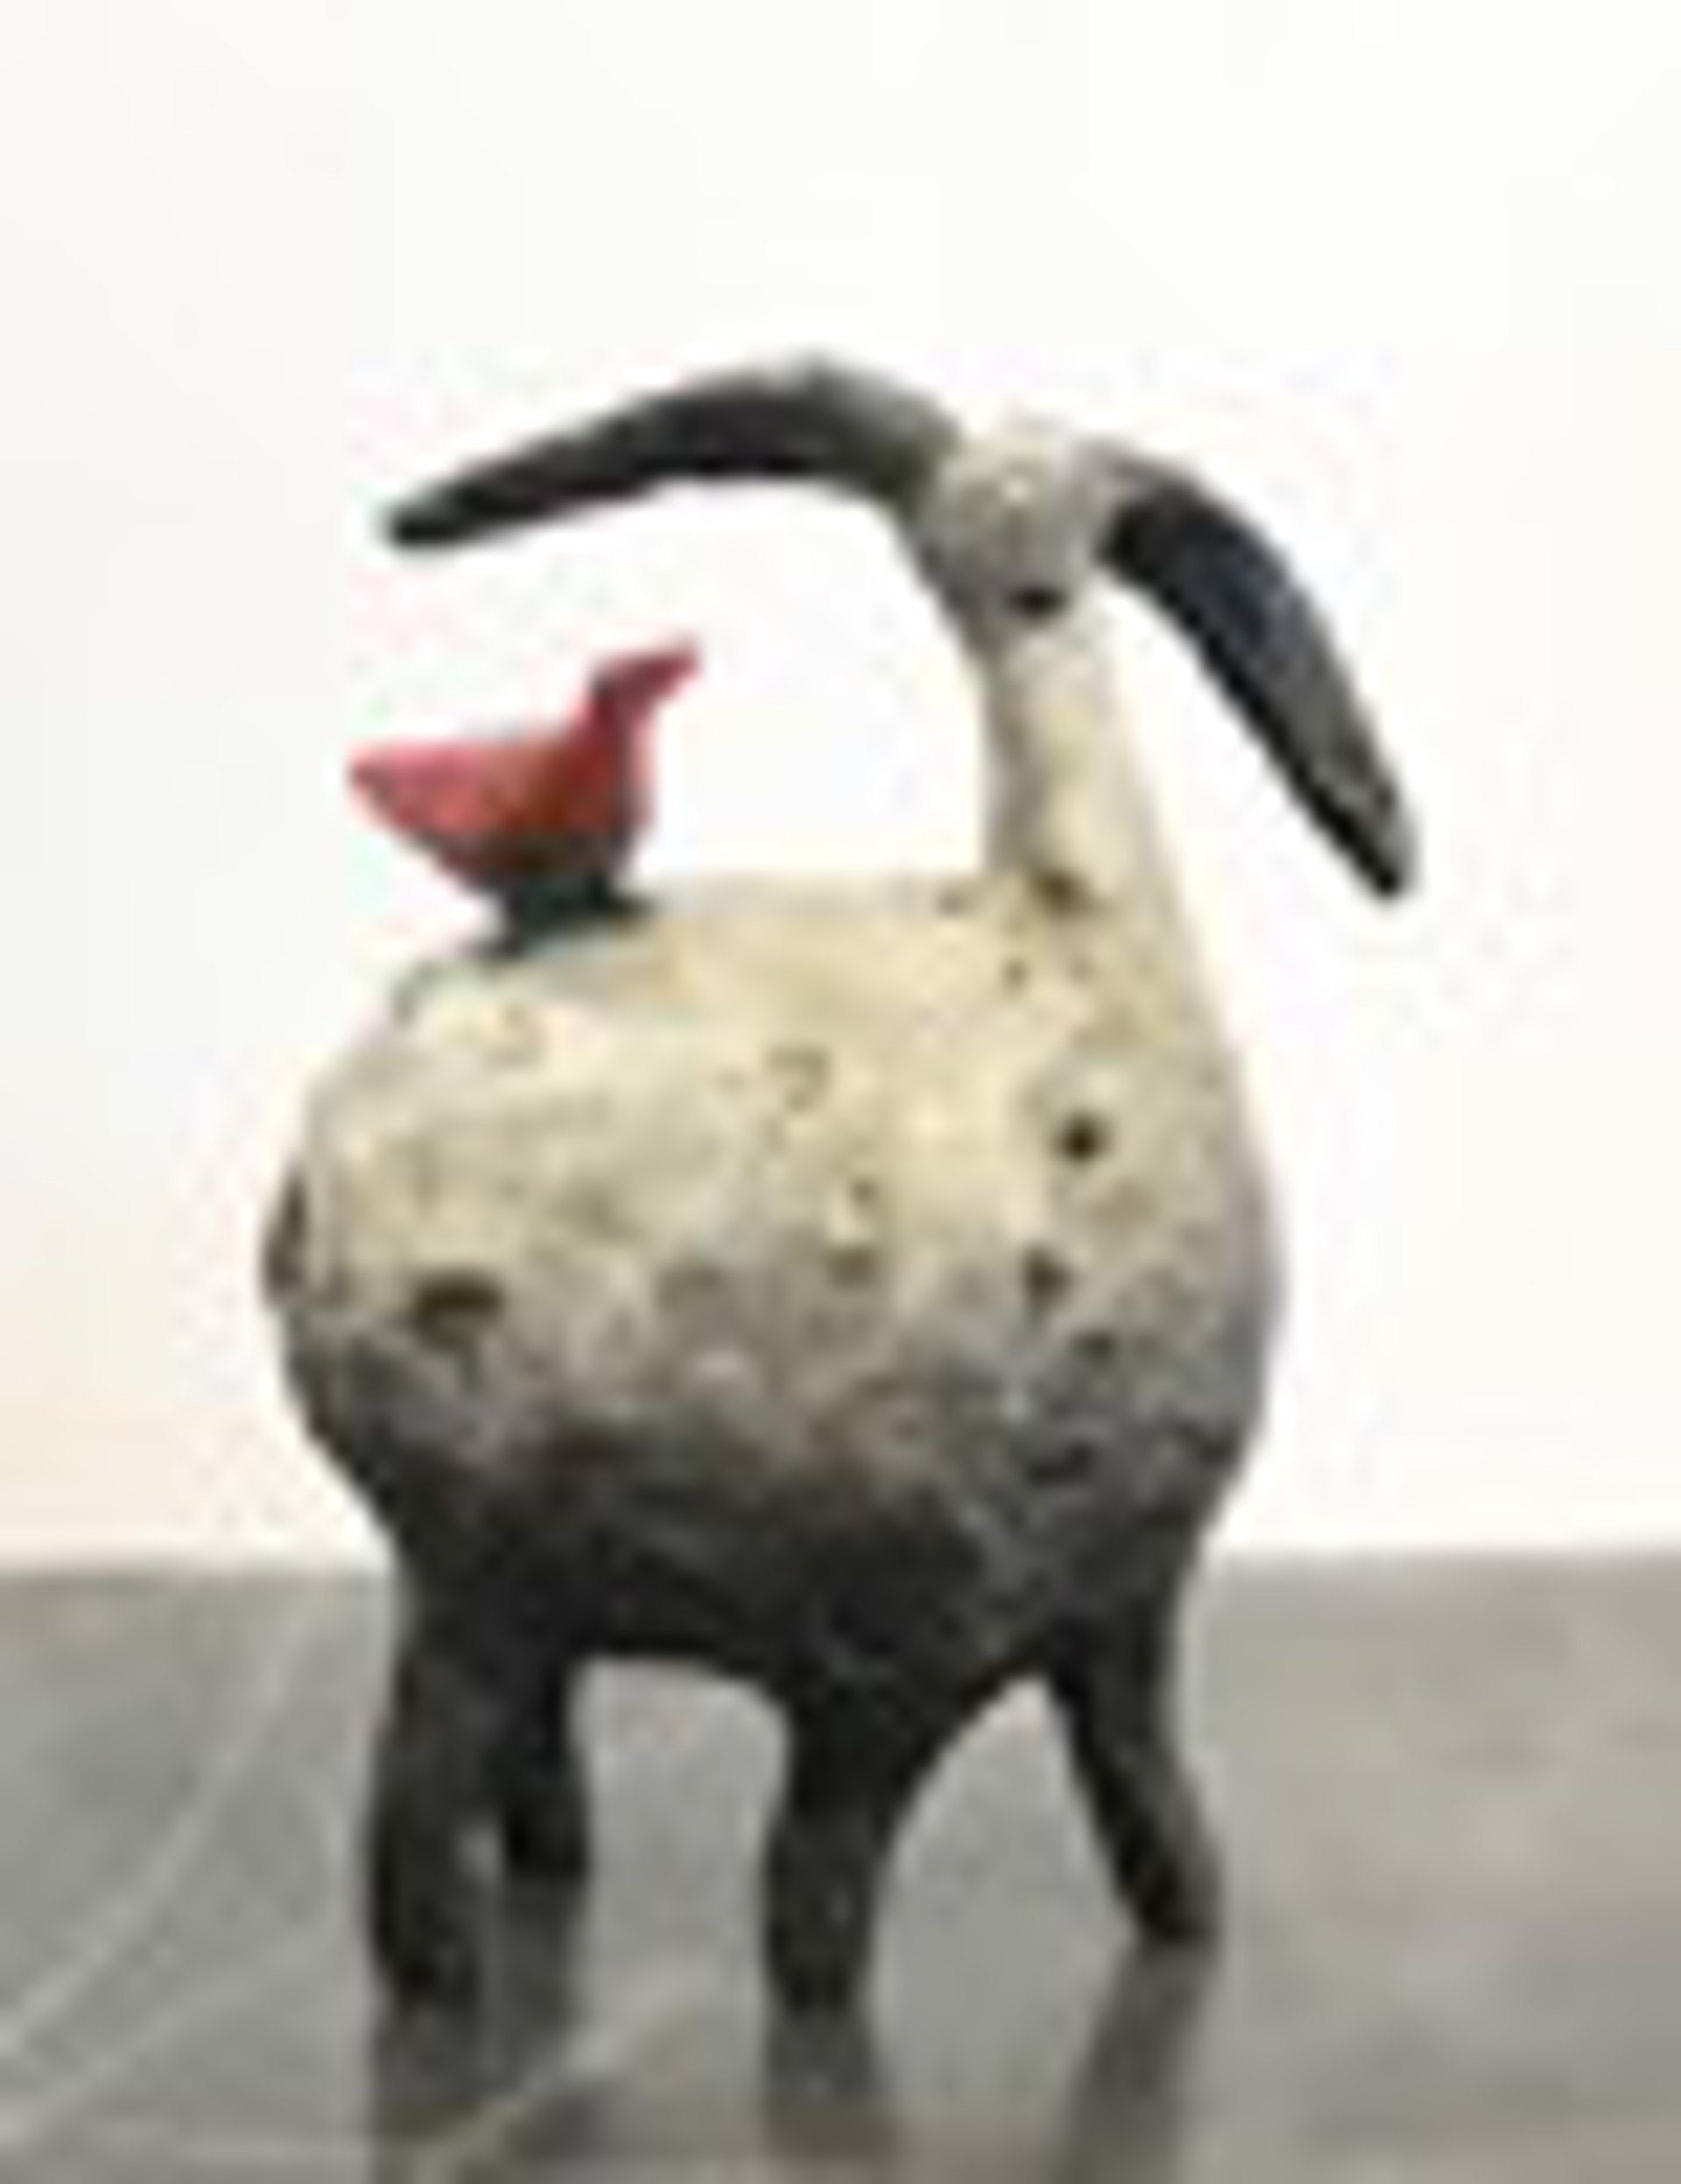 New Friends/Marble Patina/Red Bird by Jill Shwaiko